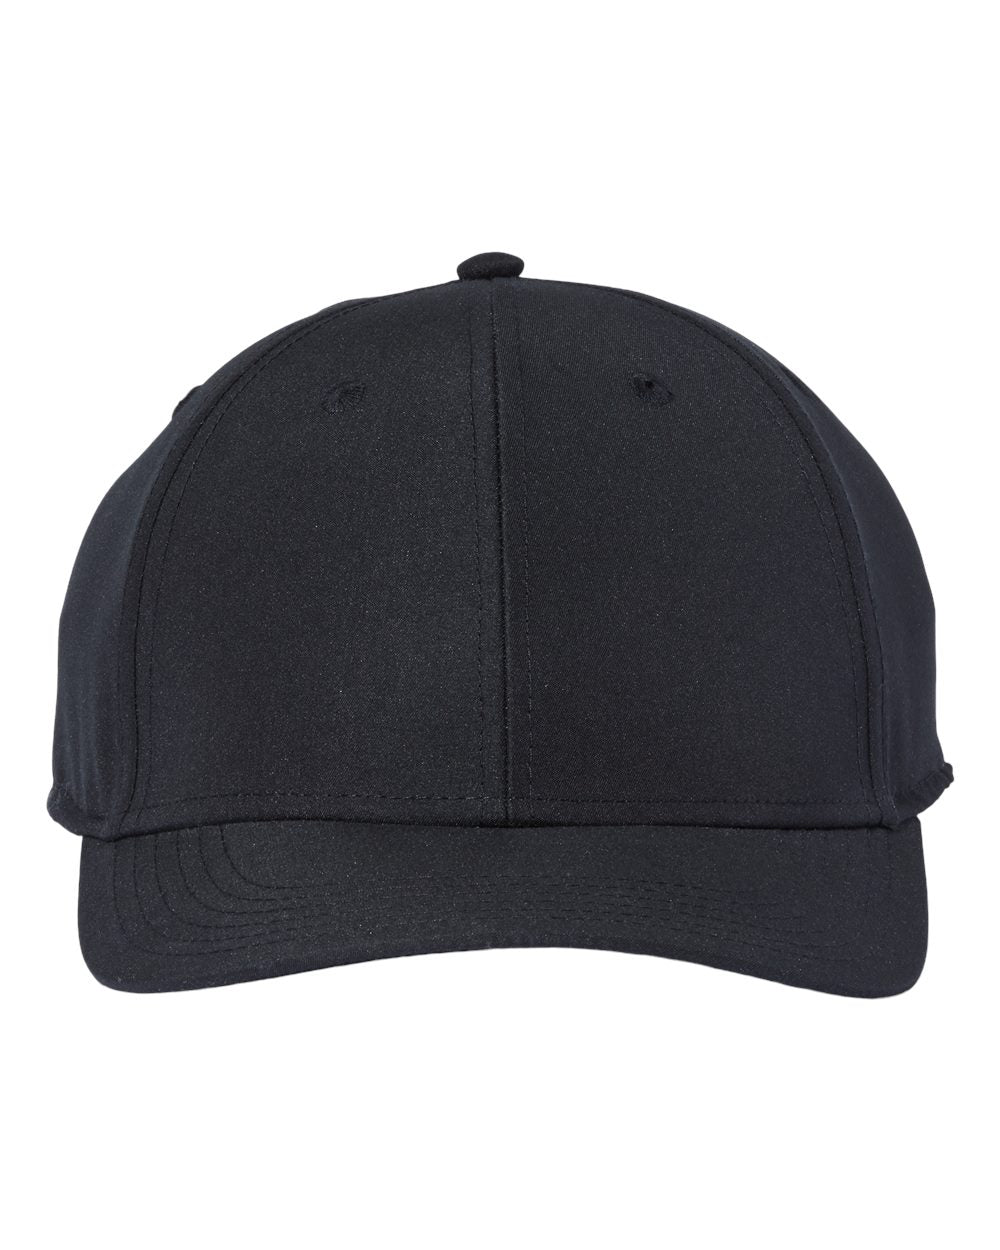 Atlantis REFE Cap: Your Sustainable Style Choice